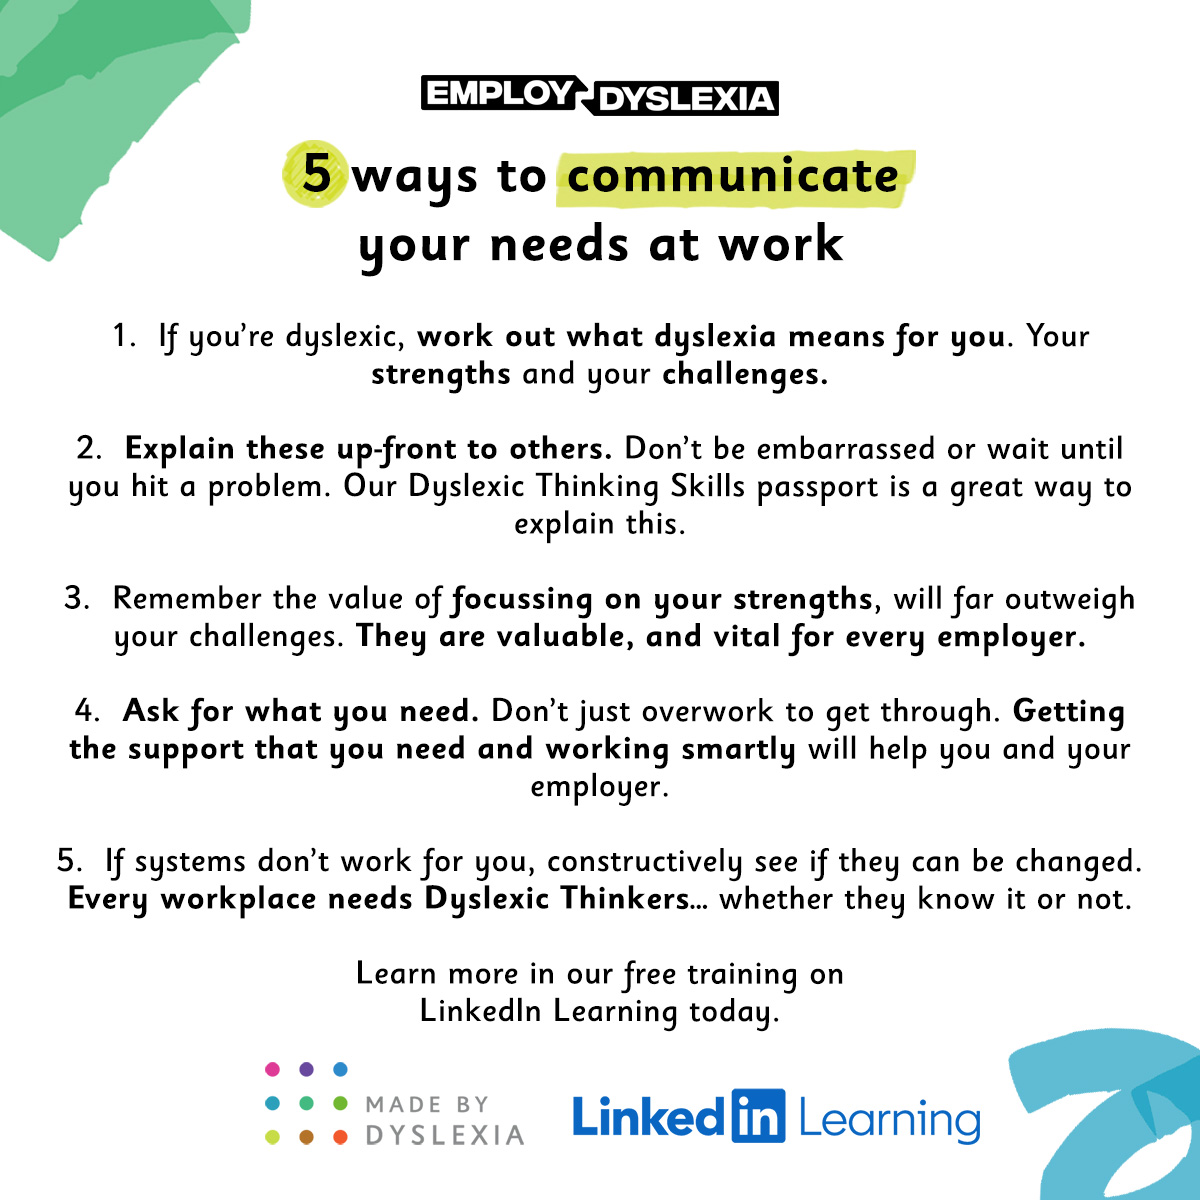 As dyslexics, we process information differently. This means we sometimes struggle with things others find easy. Here are 5 tips on how to communicate your needs at work, so you can create a culture where your Dyslexic Thinking thrives. Learn more: linkedin.com/learning/empow…